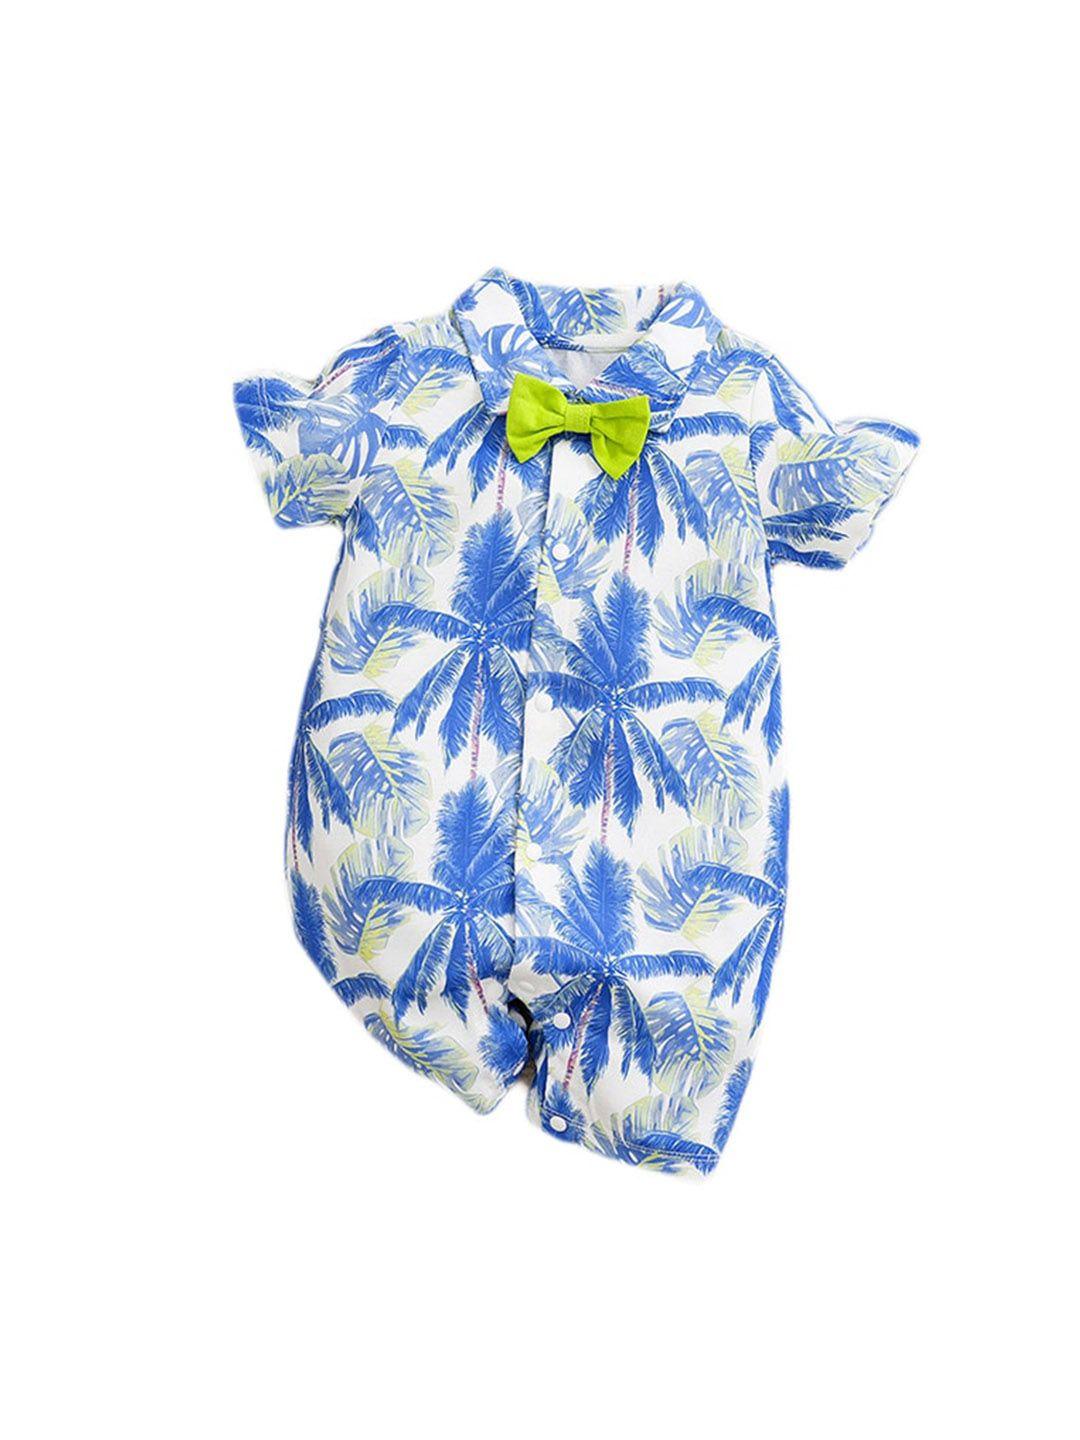 stylecast infant boys white & blue tropical printed cotton rompers